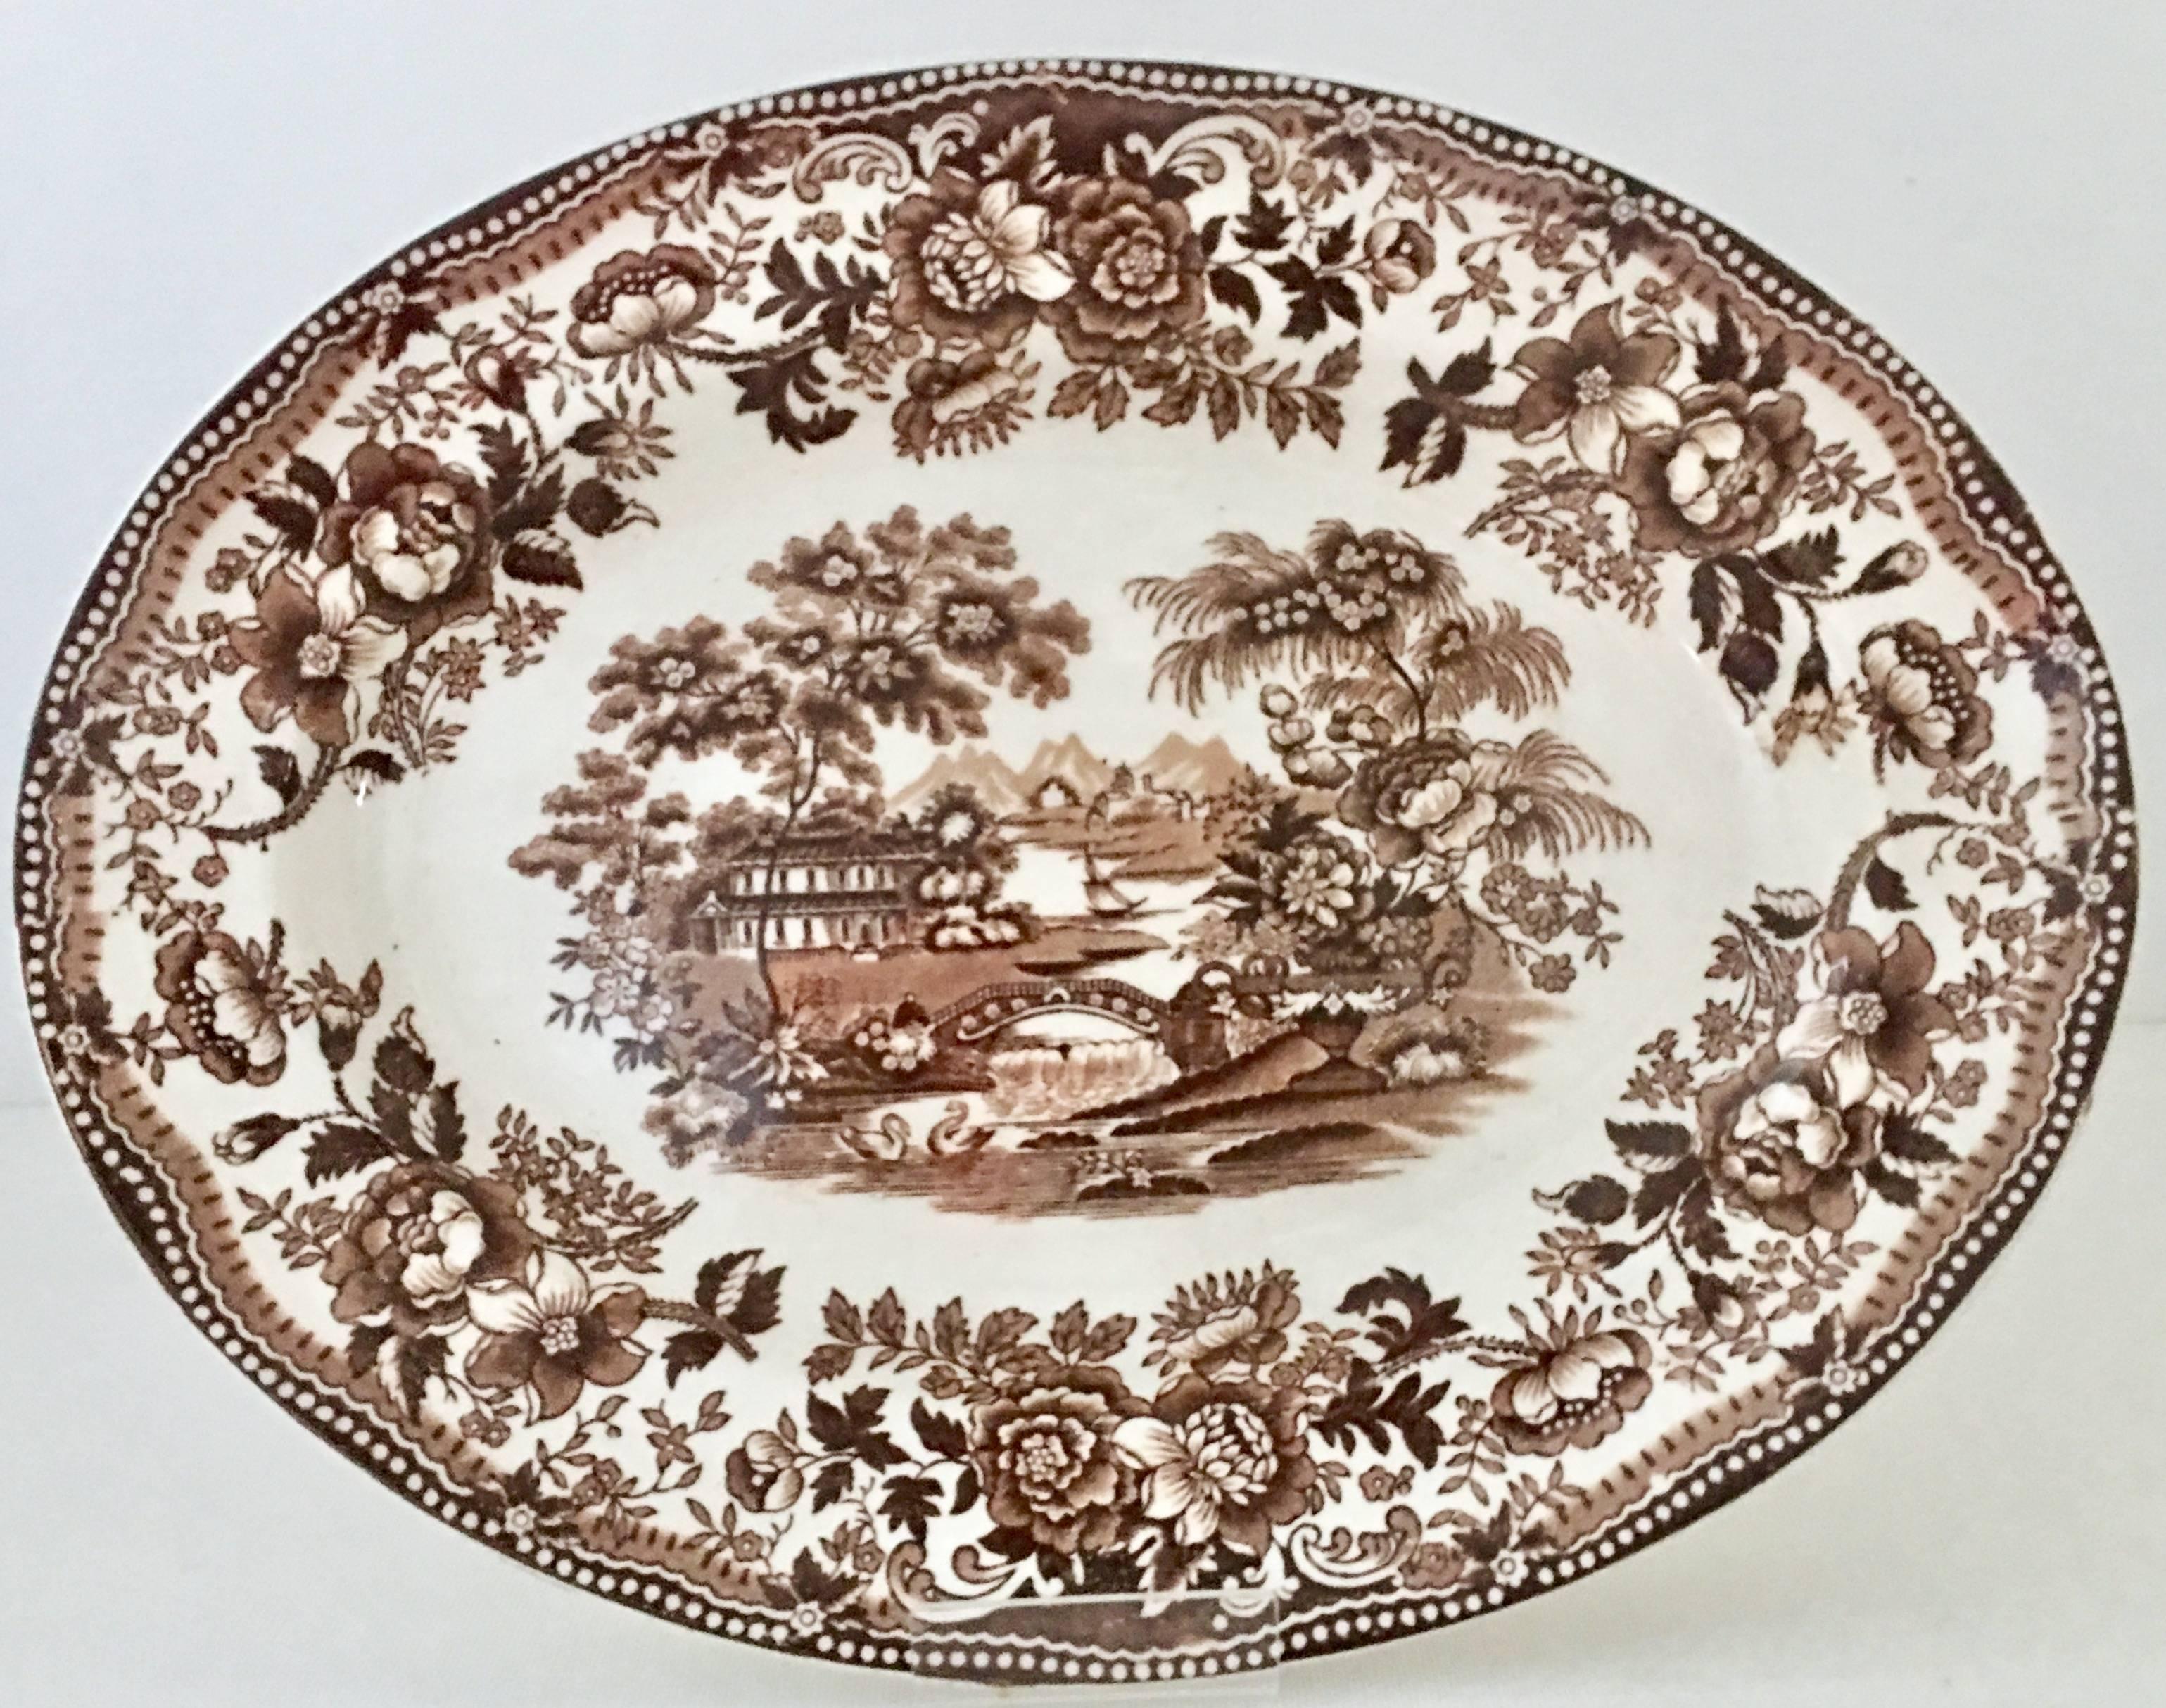 1940s Staffordshire, England ironstone brown and white oval serving platter, 